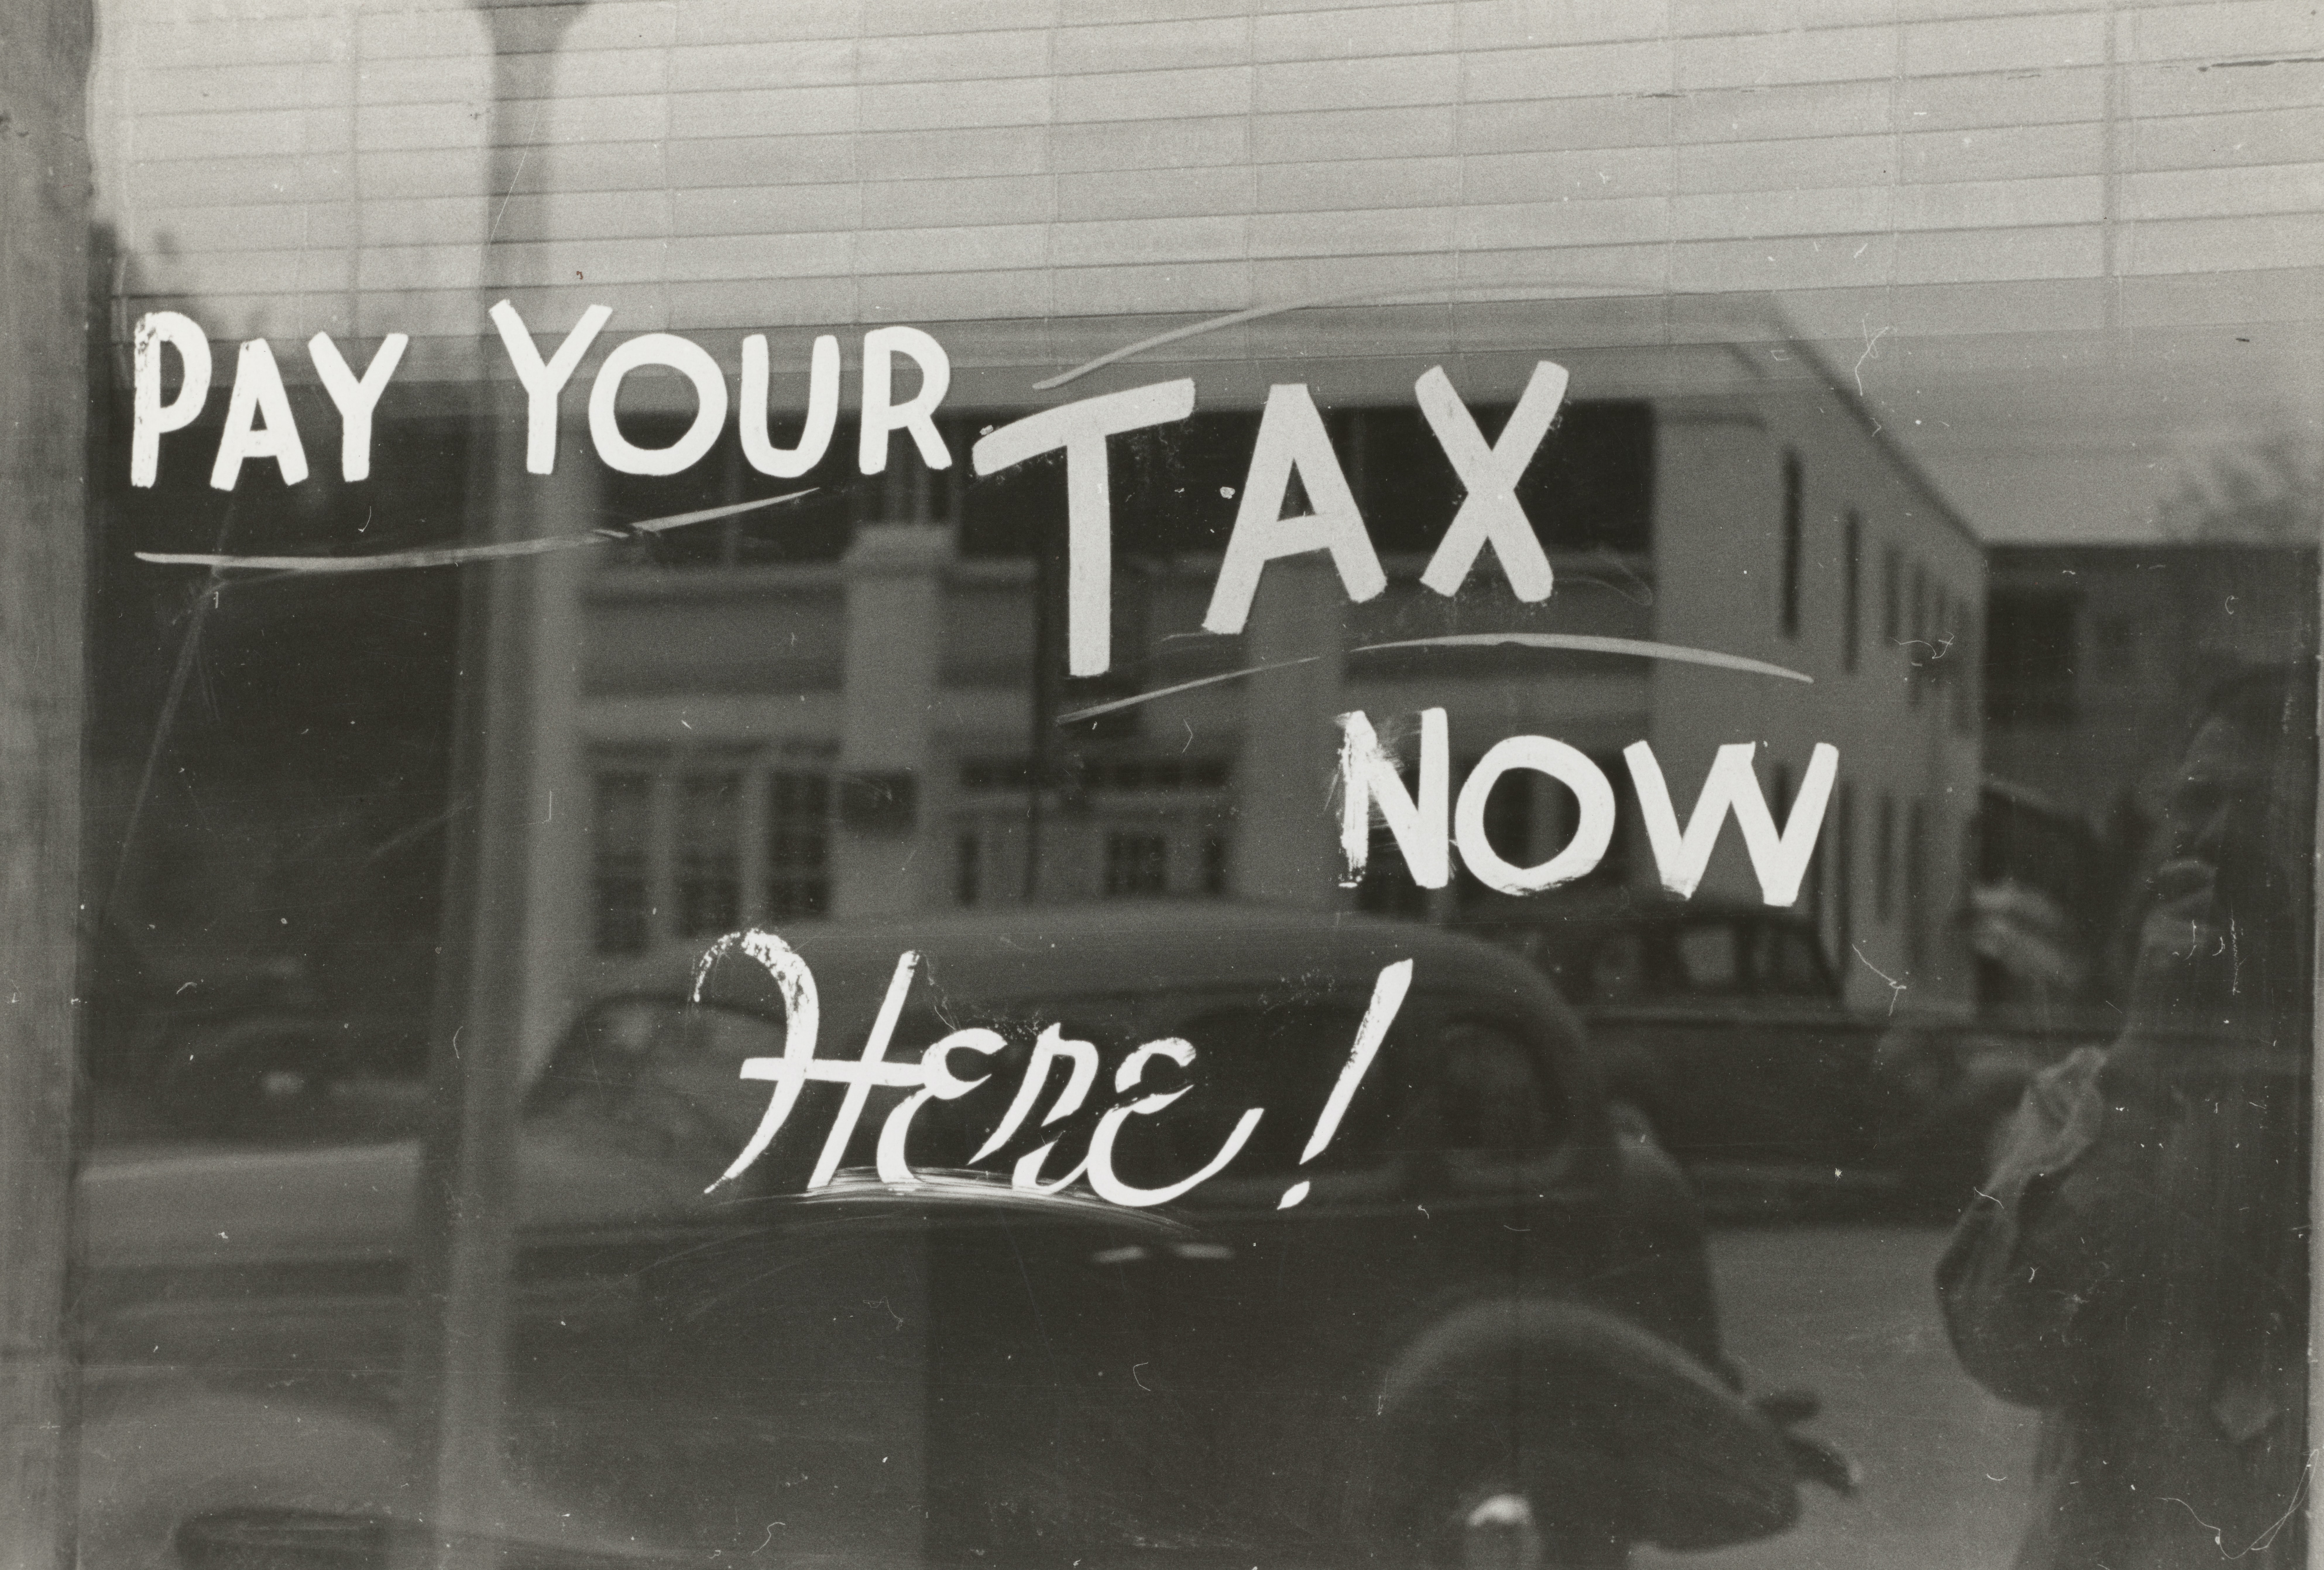 Photo d'une vitrine proclamant "Pay your tax now here !"